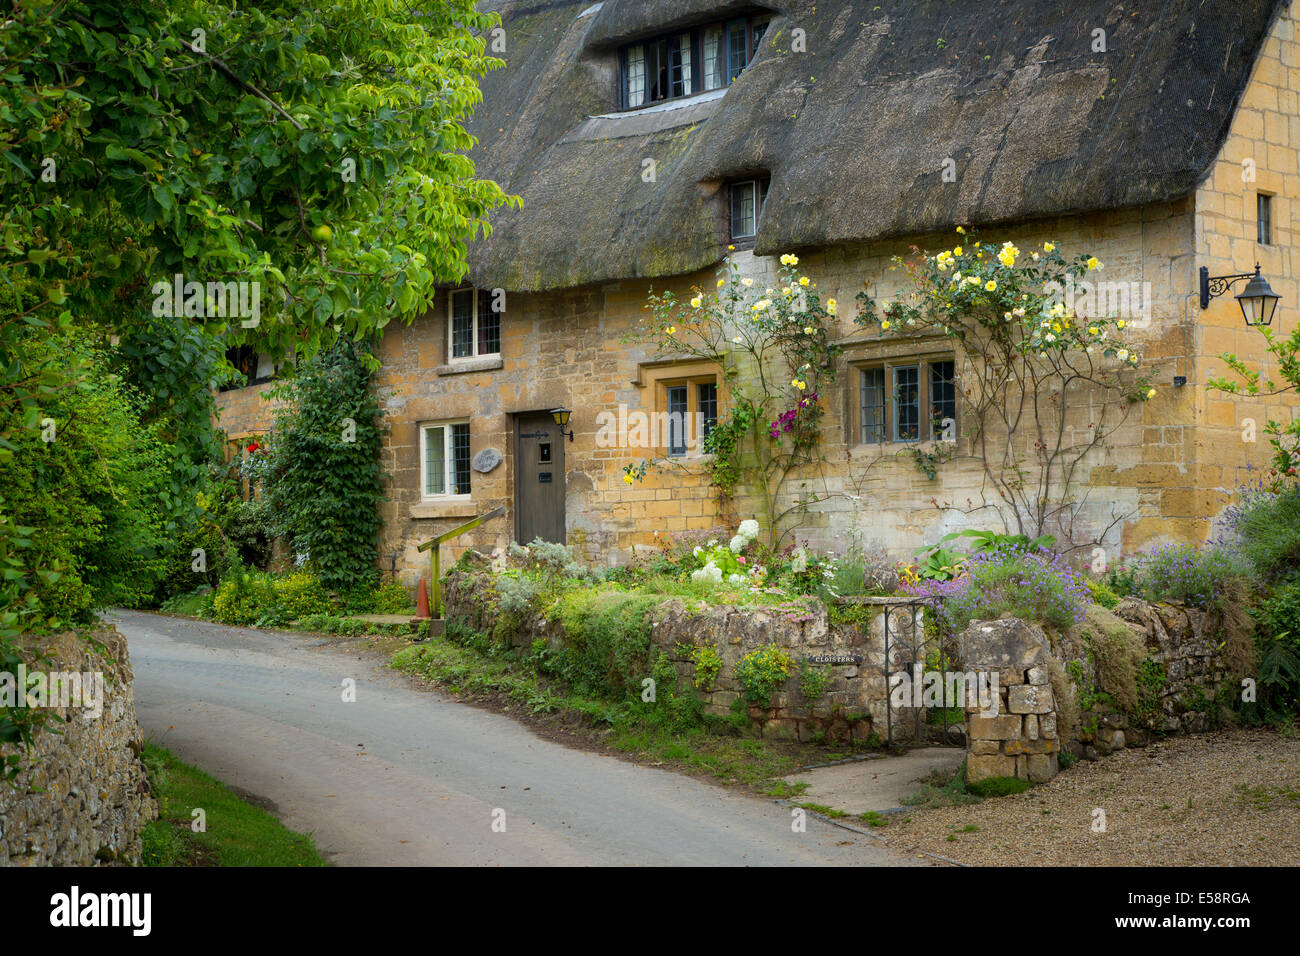 Thatched Roof home in Stanton, the Cotswolds, Gloucestershire, England Stock Photo